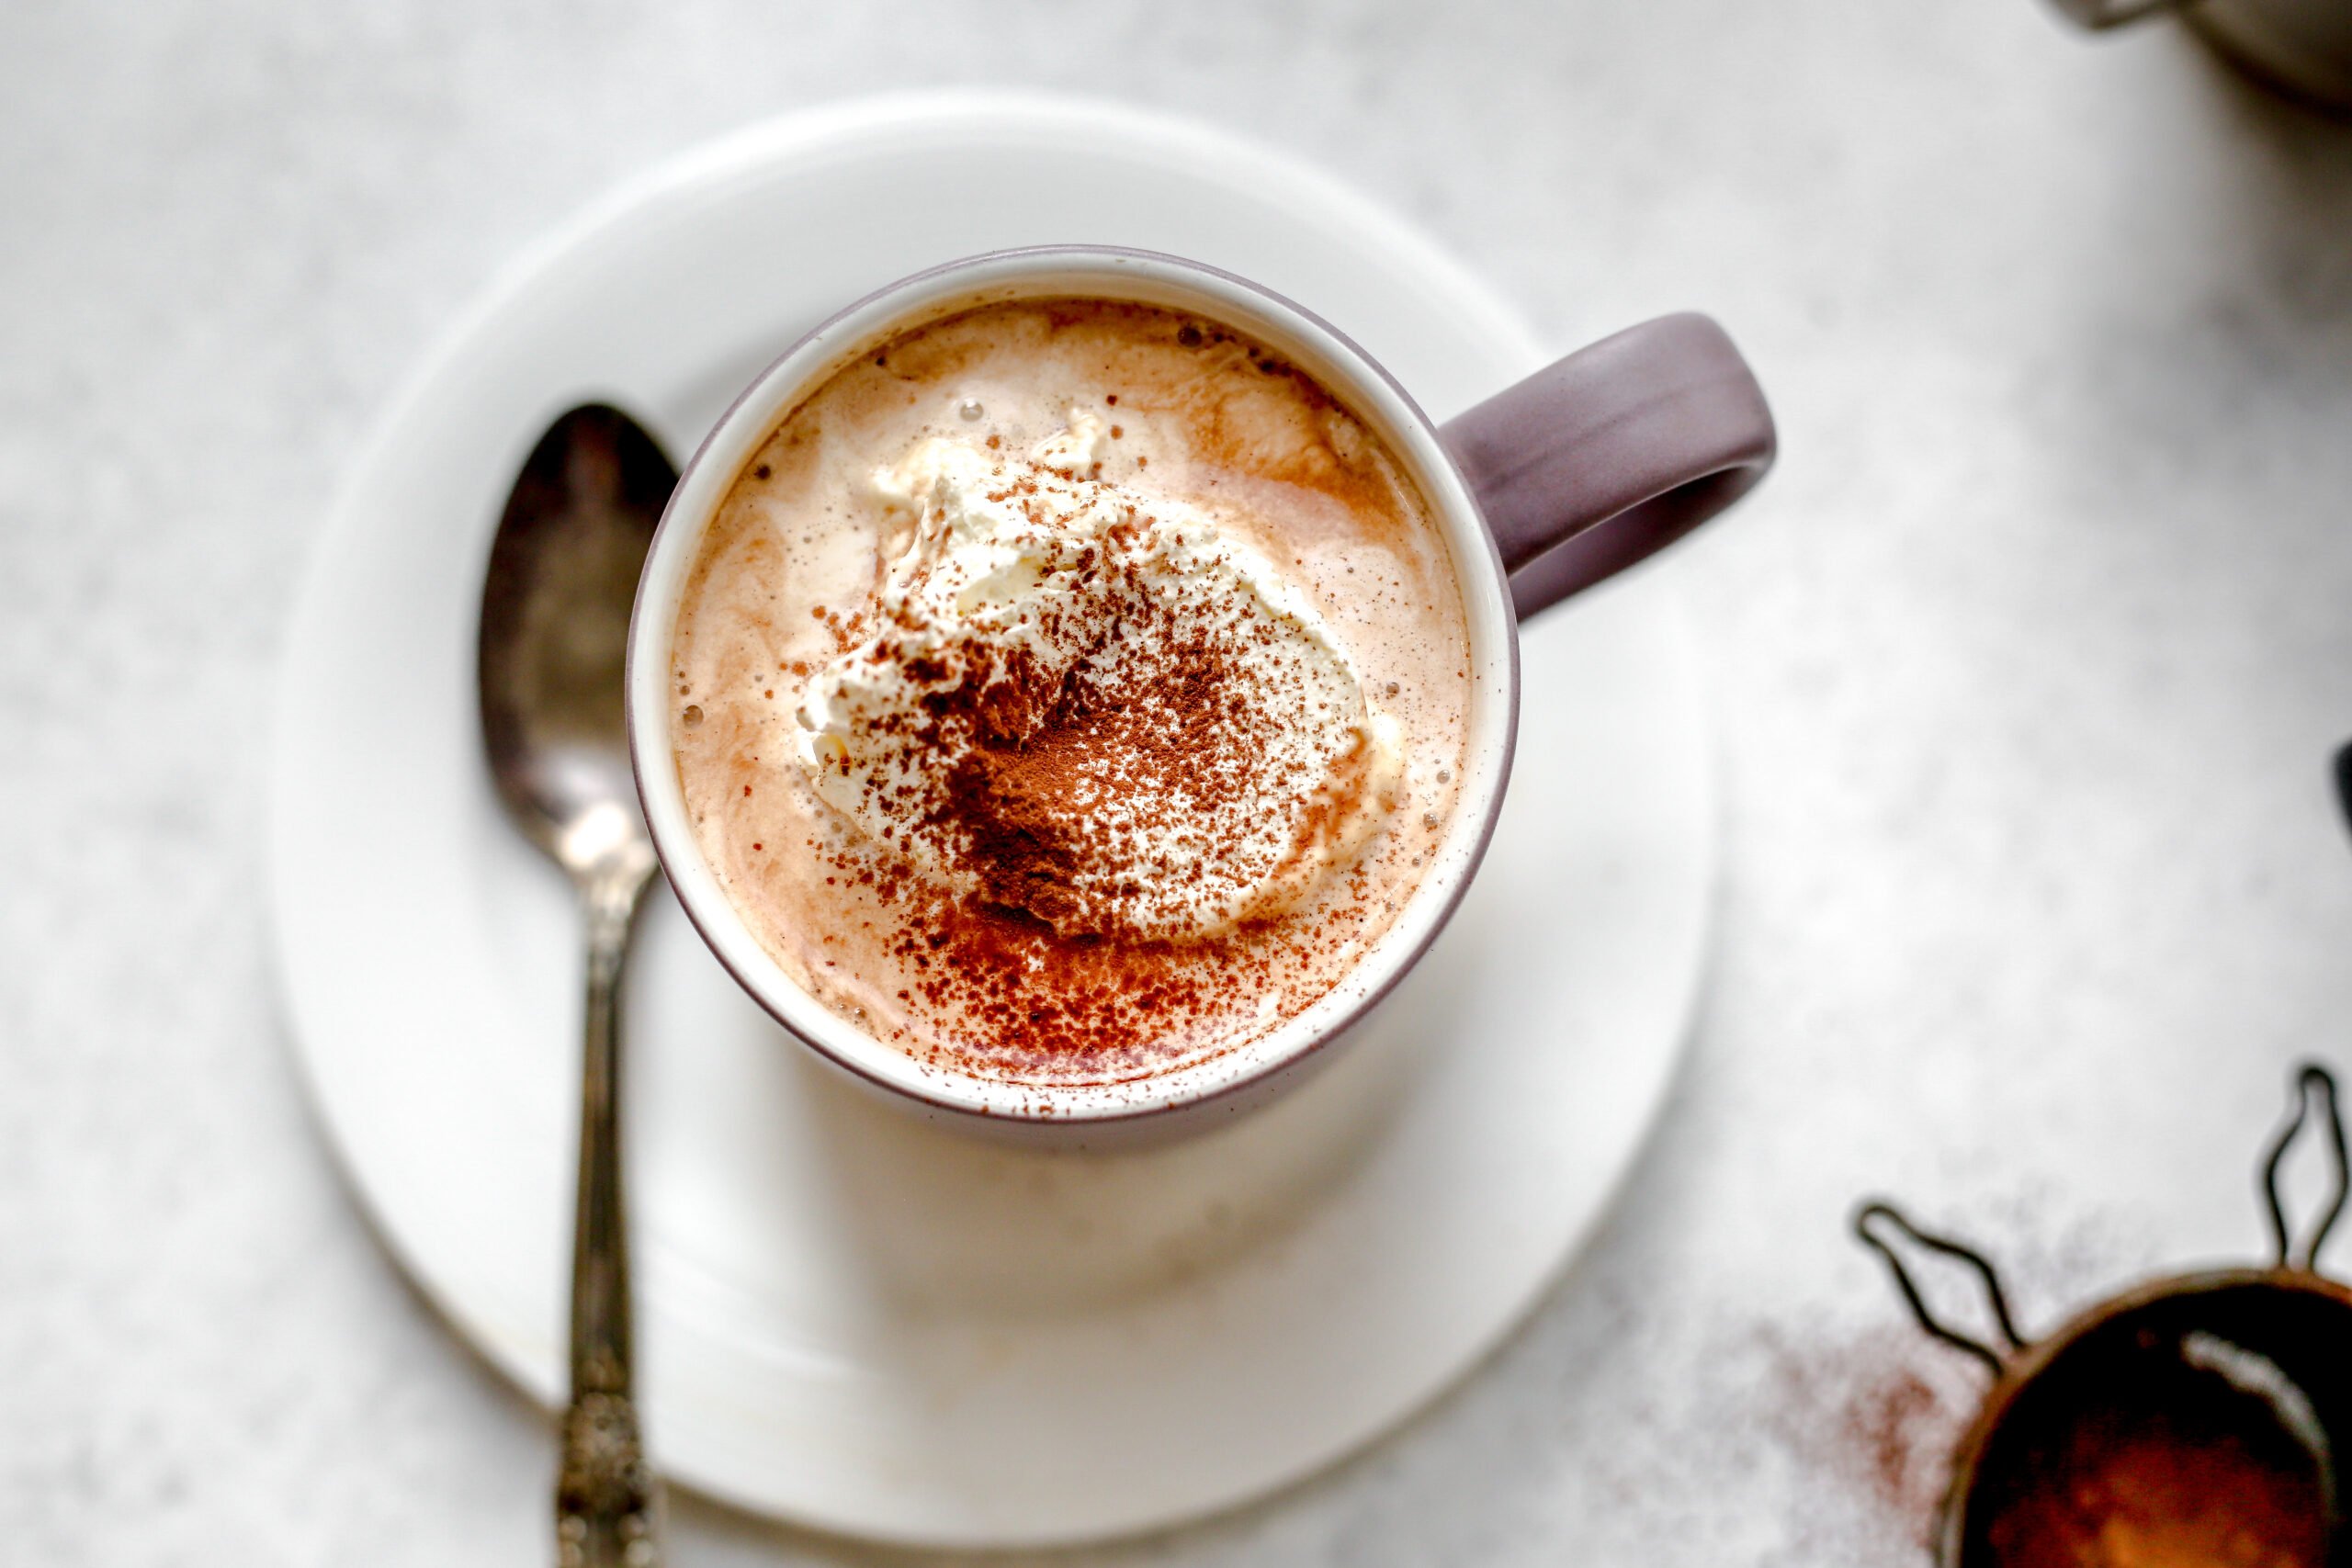 This is an overhead horizontal image of a purple/grey mug on a small white plate. In the mug is hot chocolate with whipped cream and a sprinkle of cocoa powder. A silver spoon is on the plate next to the mug. The plate sits on a light grey surface.